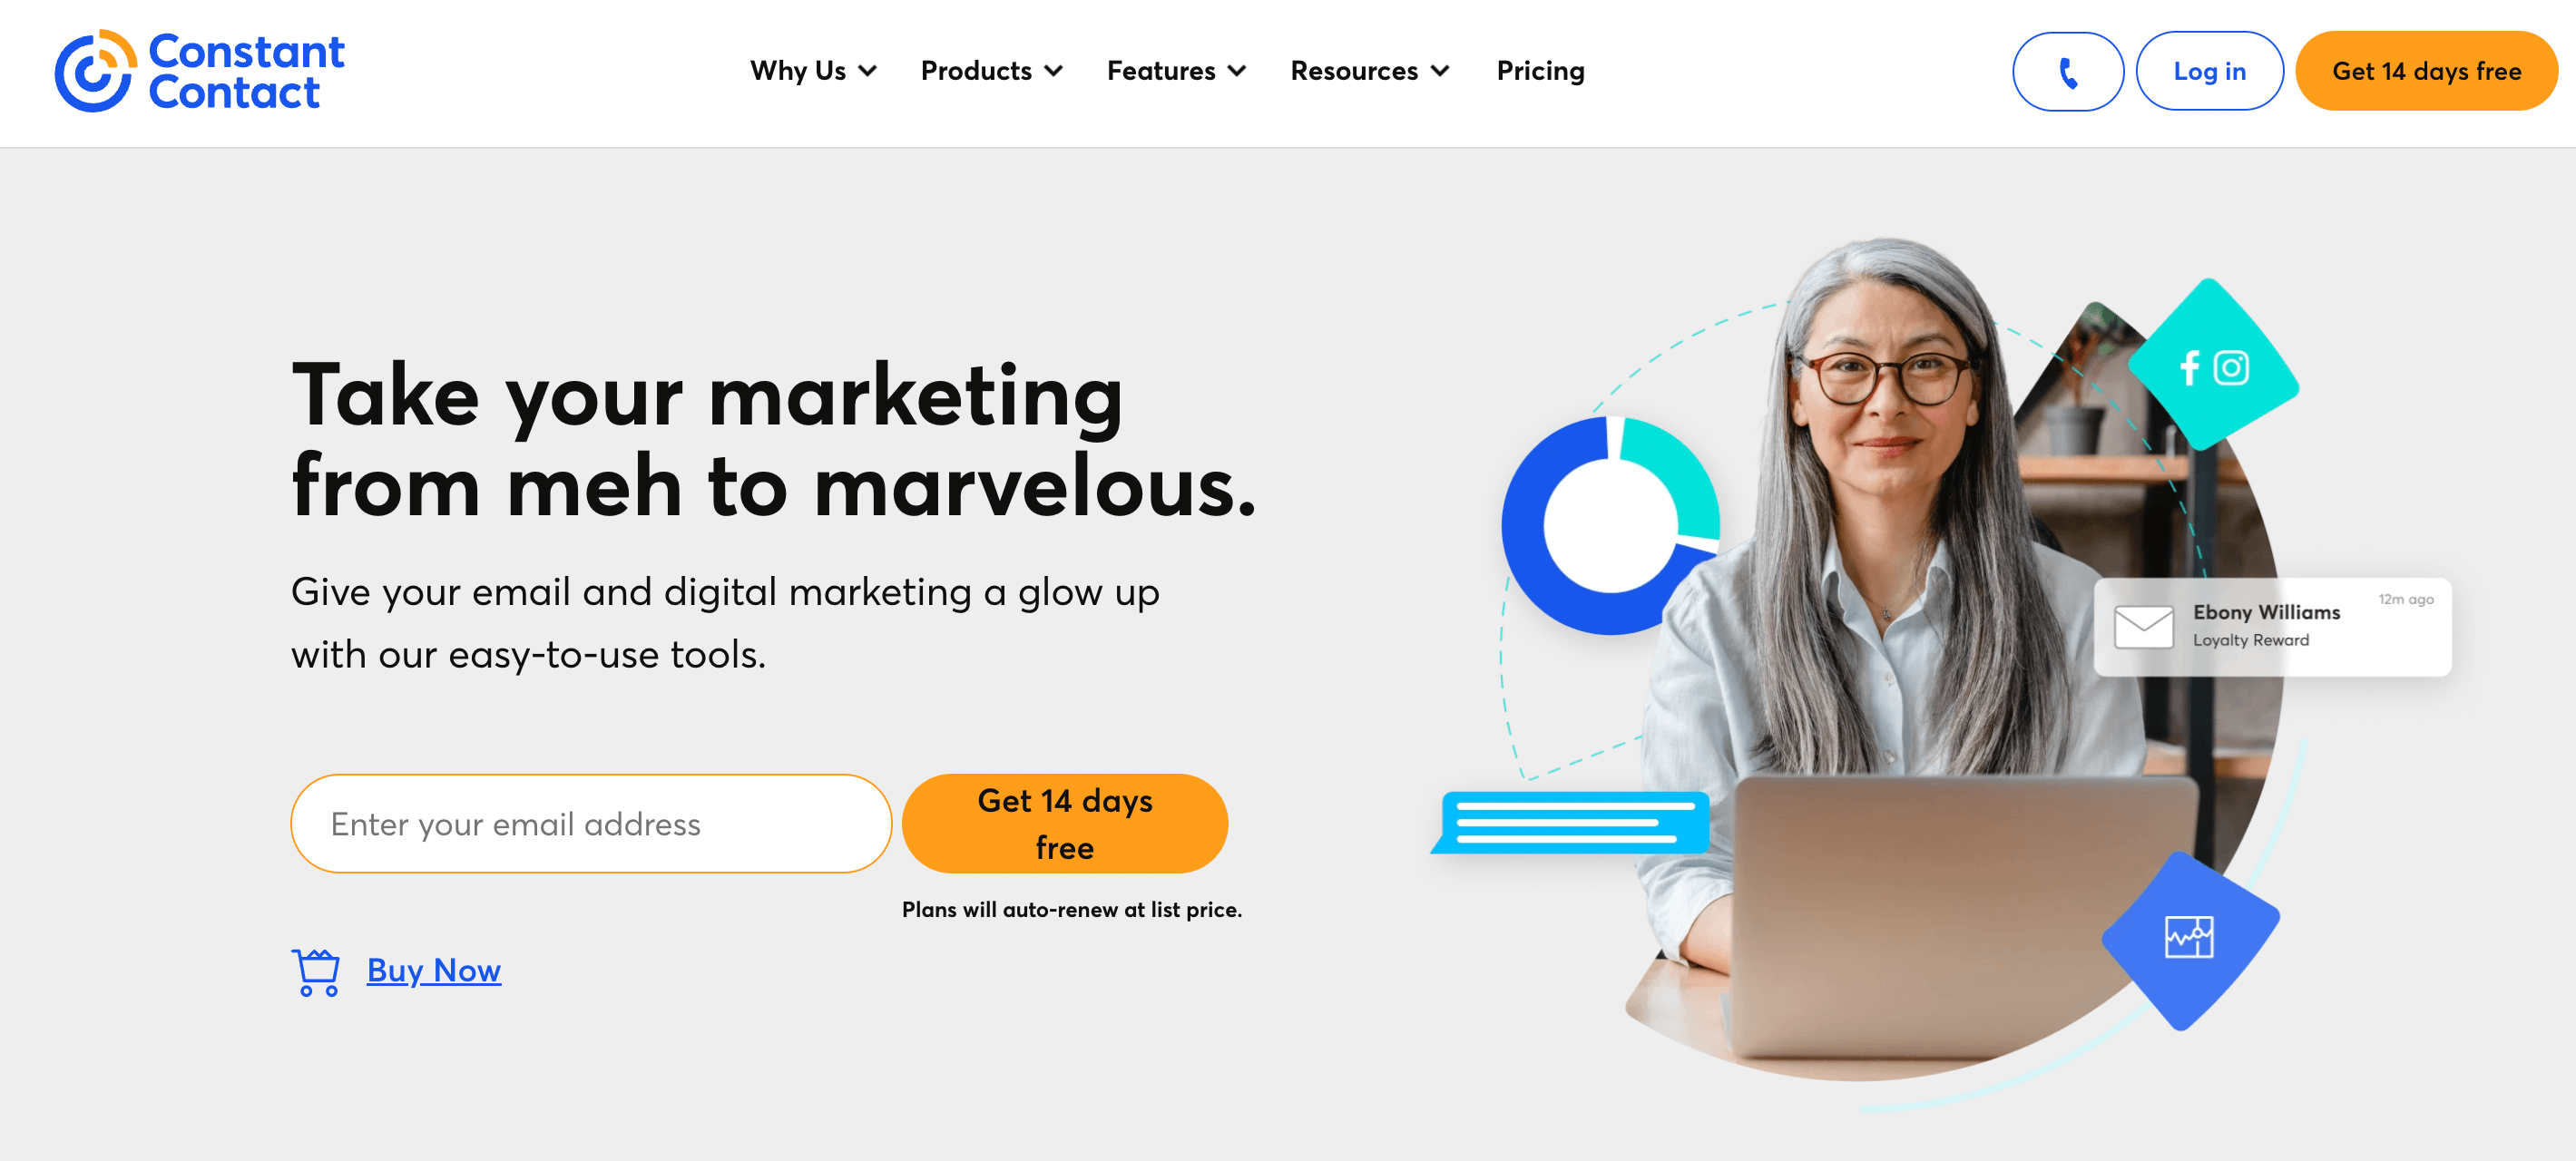 The Constant Contact home page, featuring a headline that says, “Take your marketing from meh to marvelous.”